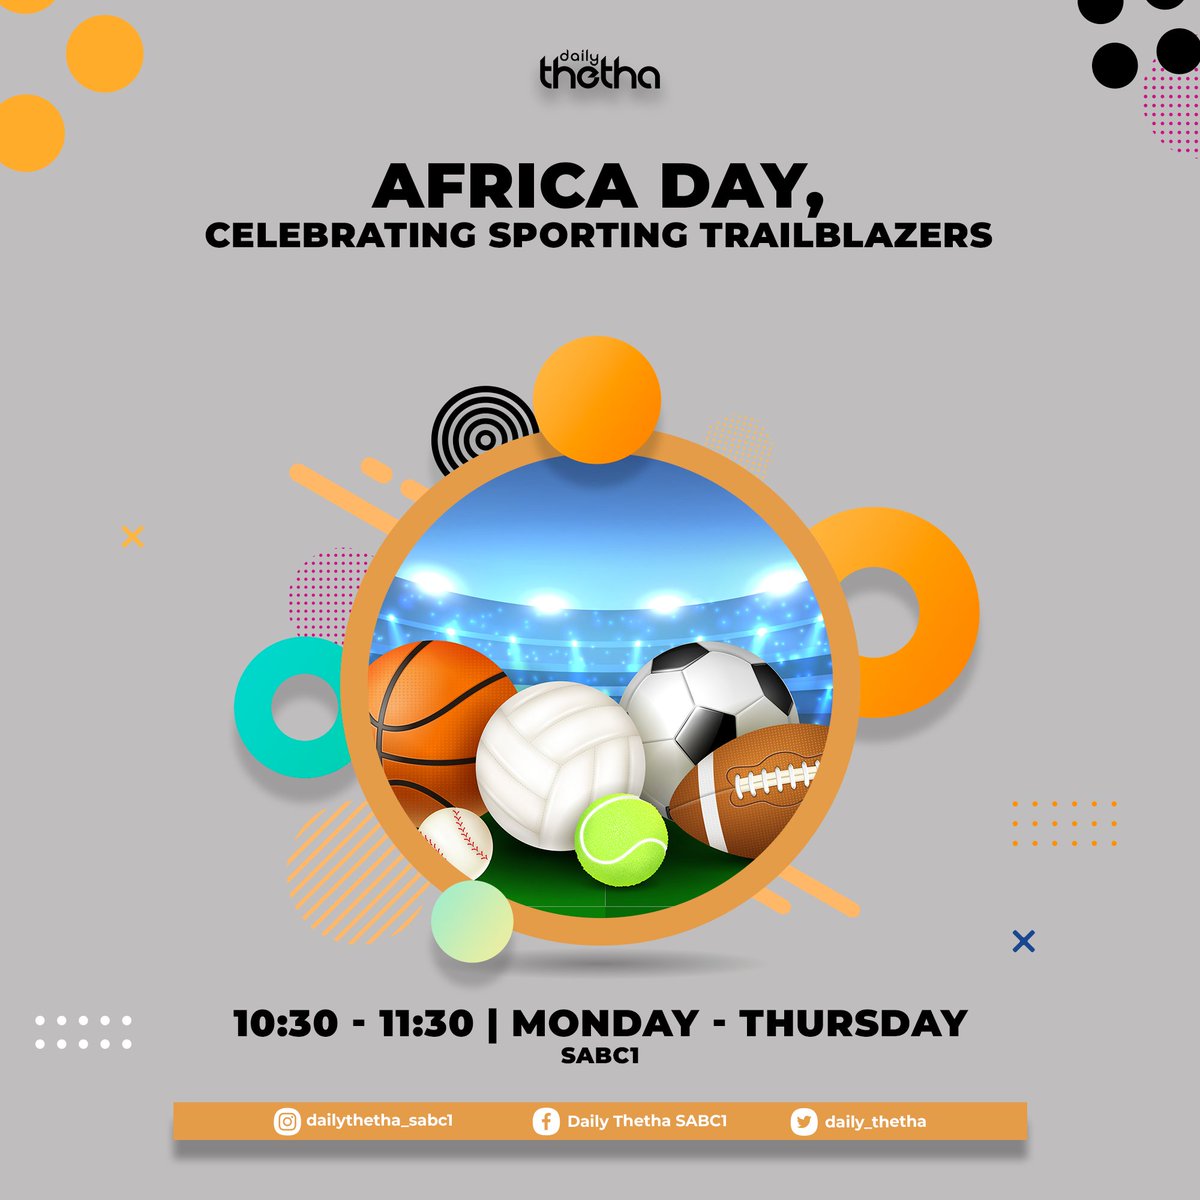 Today, we celebrate Africa Day with a focus on Sports Trailblazers.

In keeping with the theme of African brilliance, we celebrate the amazing milestones in sports.

What do the achievements mean and should we expect more from them?

We're live at 10:30 on SABC 1. #DailyThetha